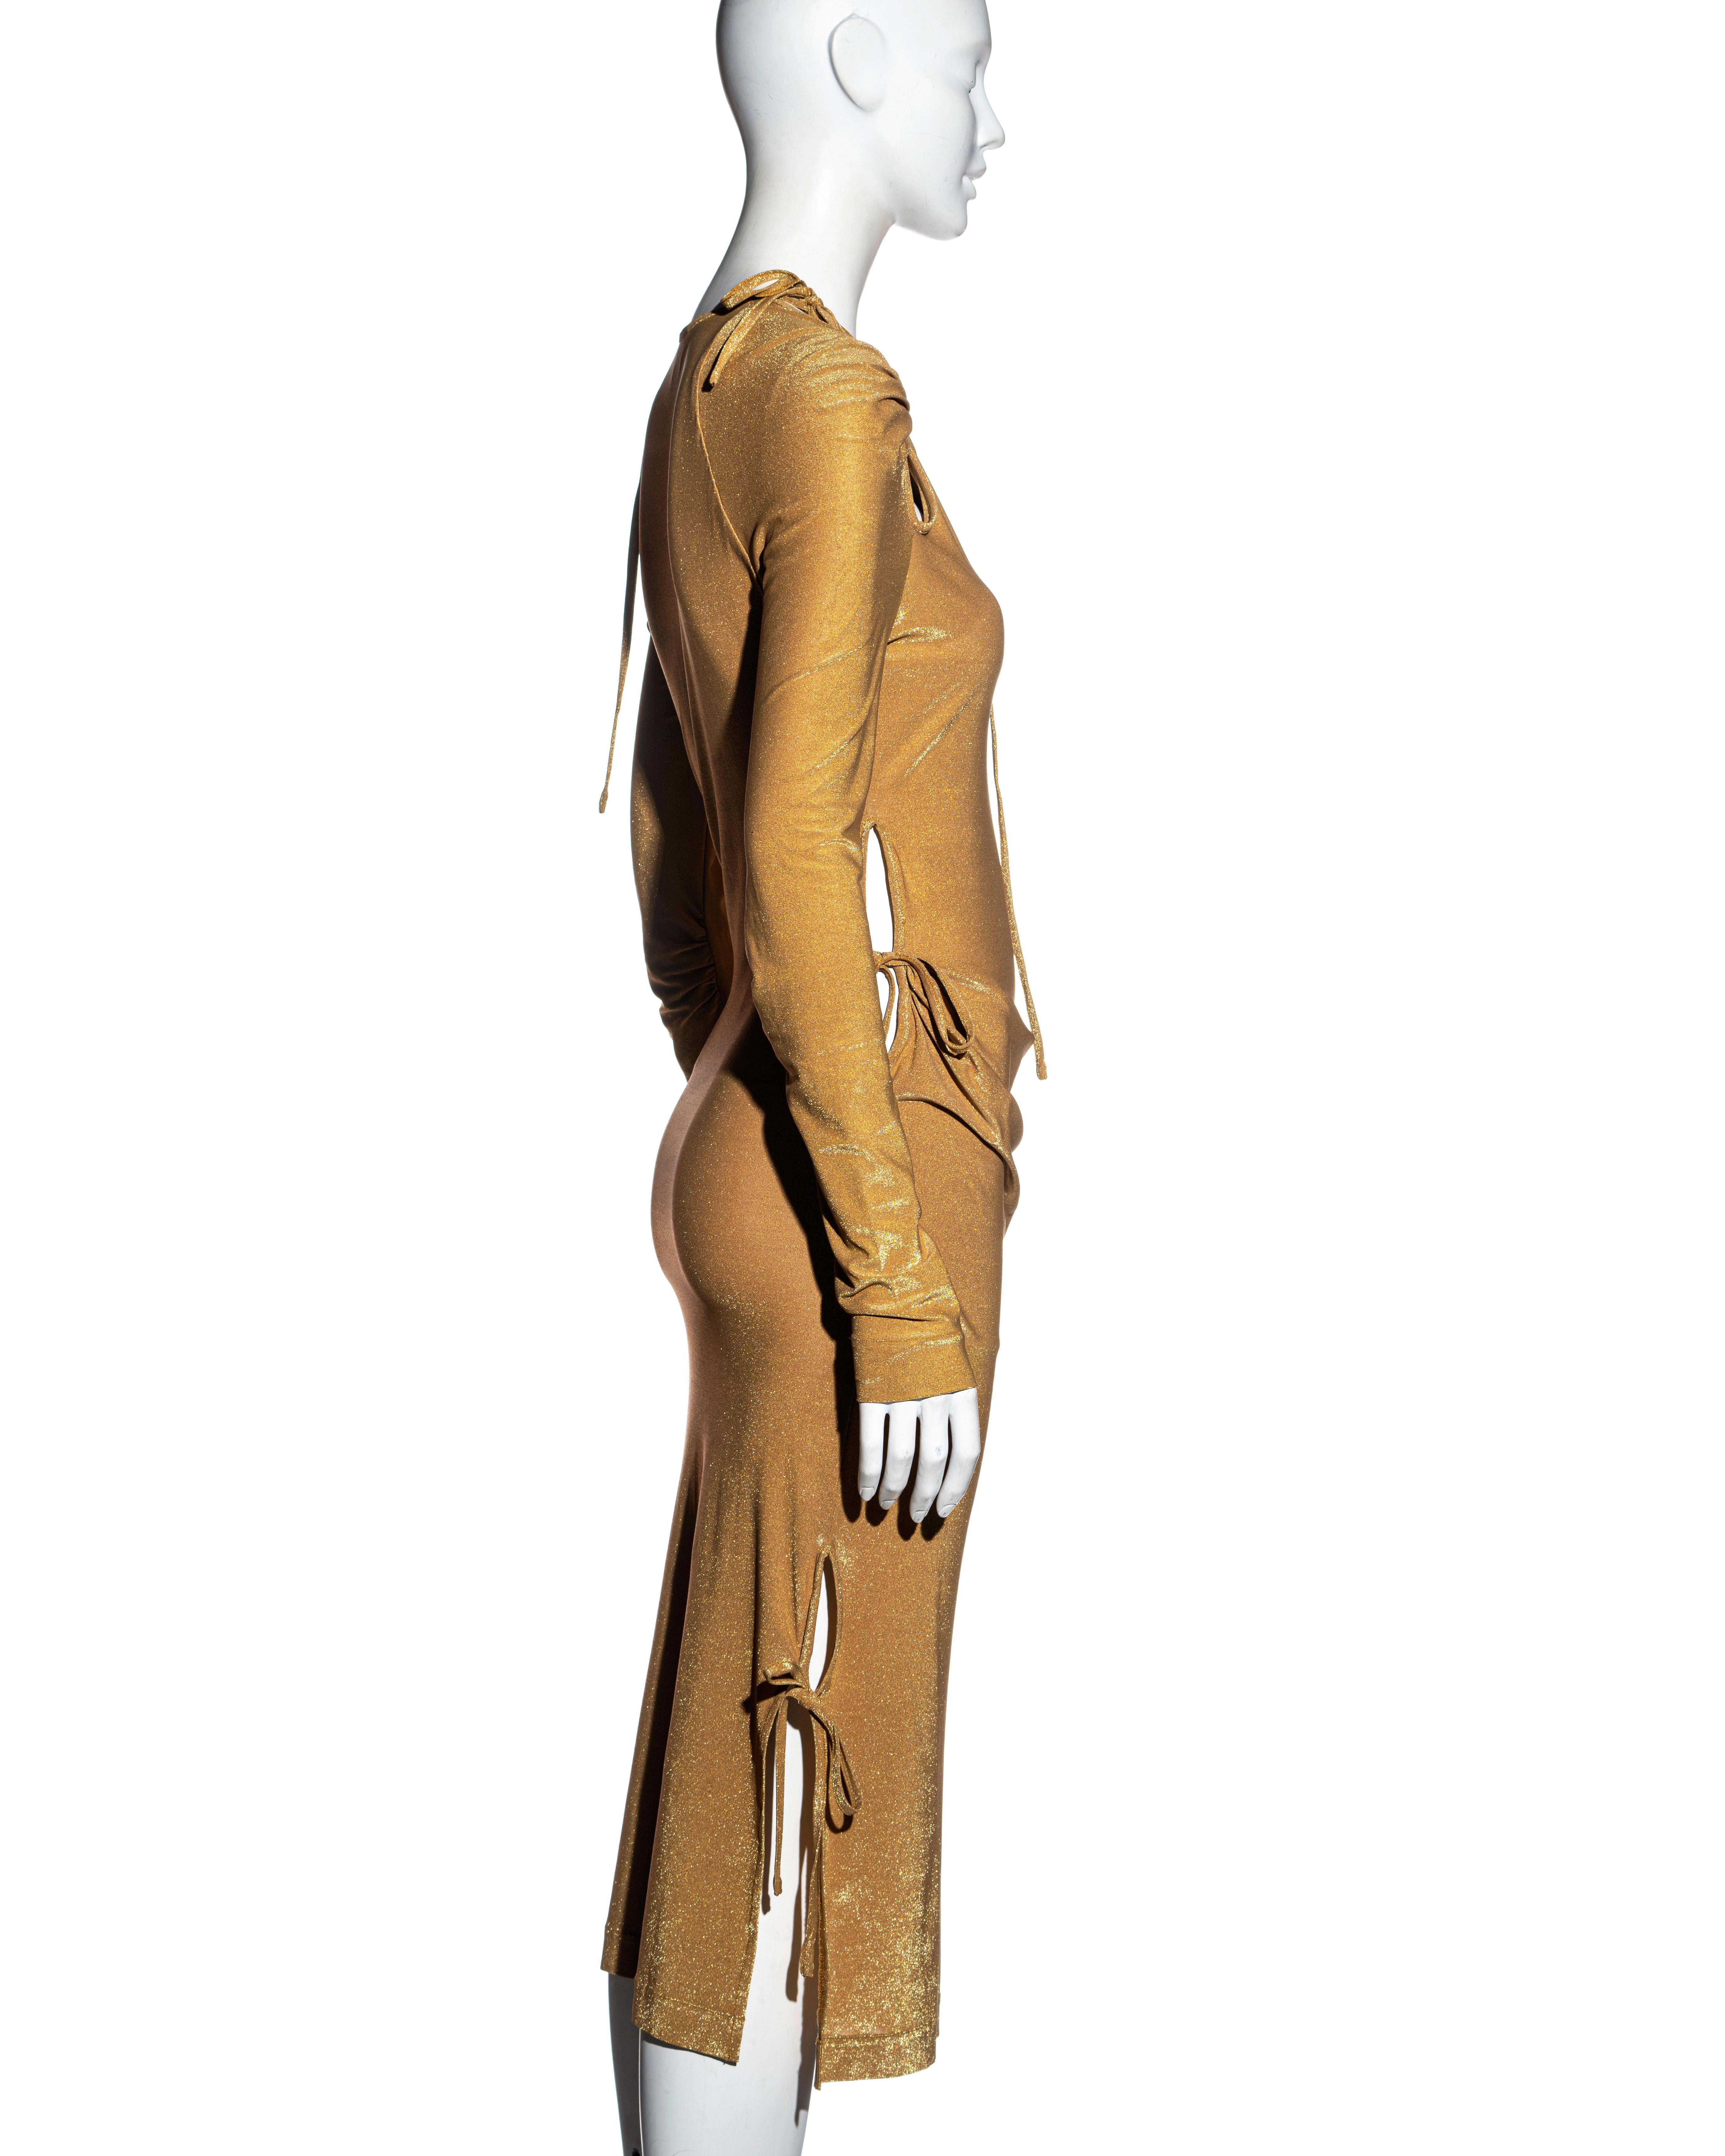 Vivienne Westwood gold stretch lurex evening dress with cut outs, fw 1997 5